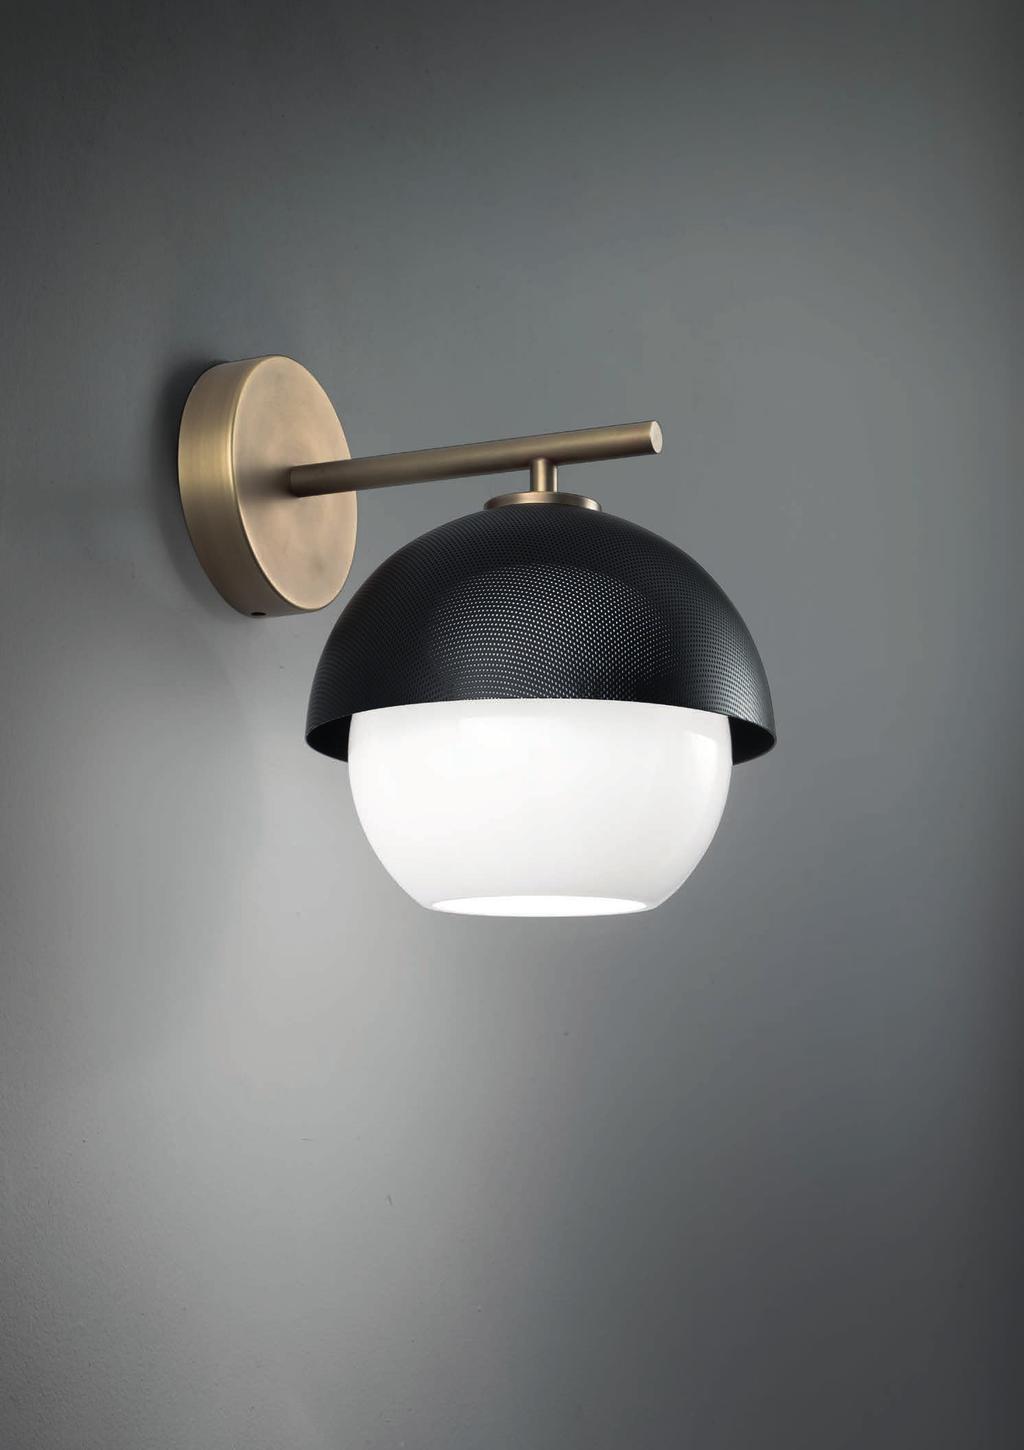 URBAN WALL 26cm-10 20cm-7 8 25cm-9 8 Wall lamp with diffuse light and white, tobacco or smoke Murano blown glass diffuser.